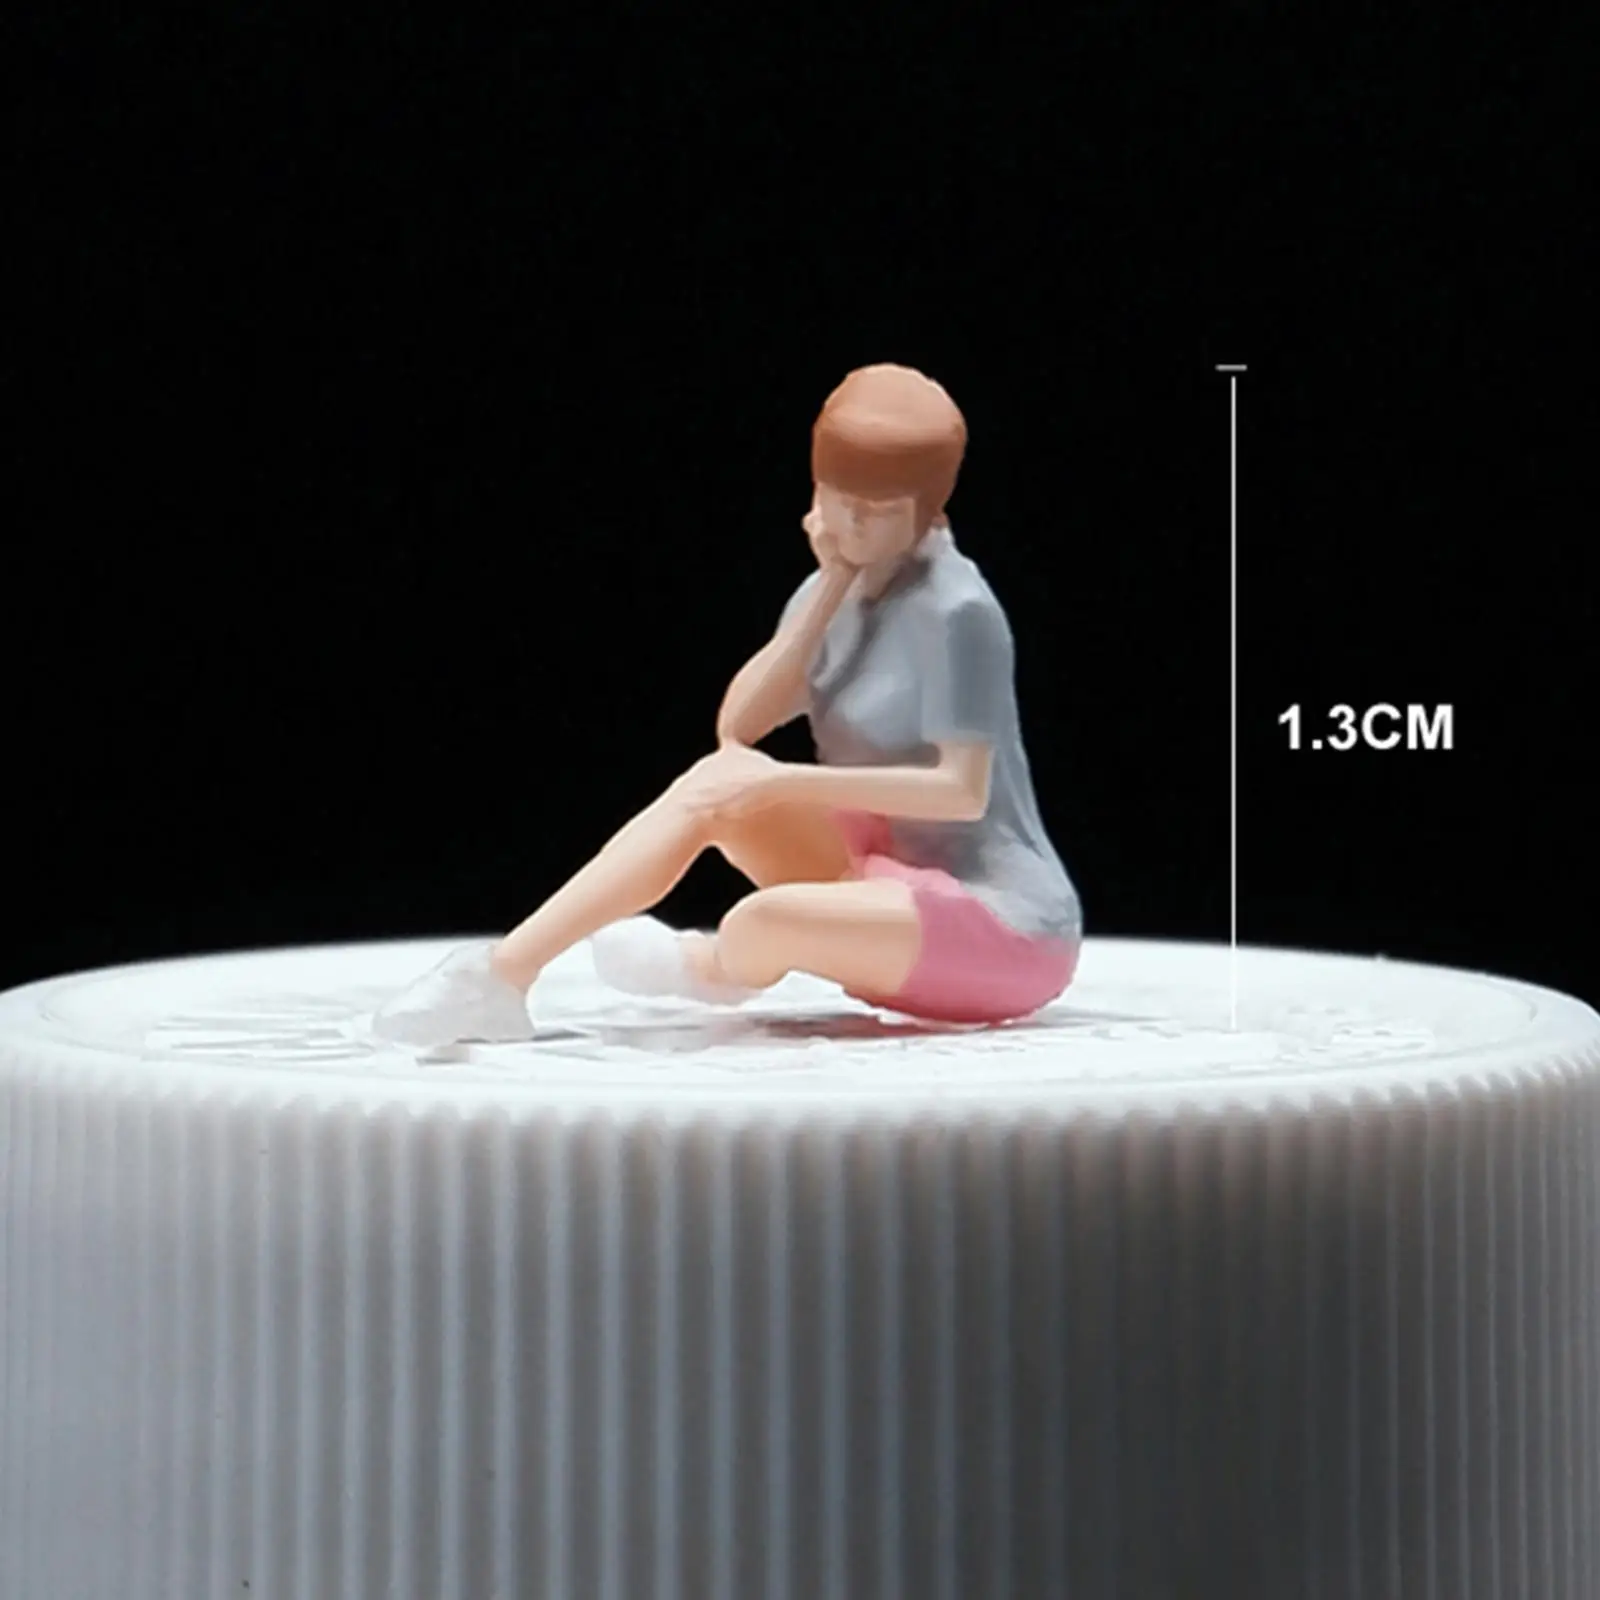 Miniature figure/64 Scale Tiny People People Figure Doll Toy for Dioramas